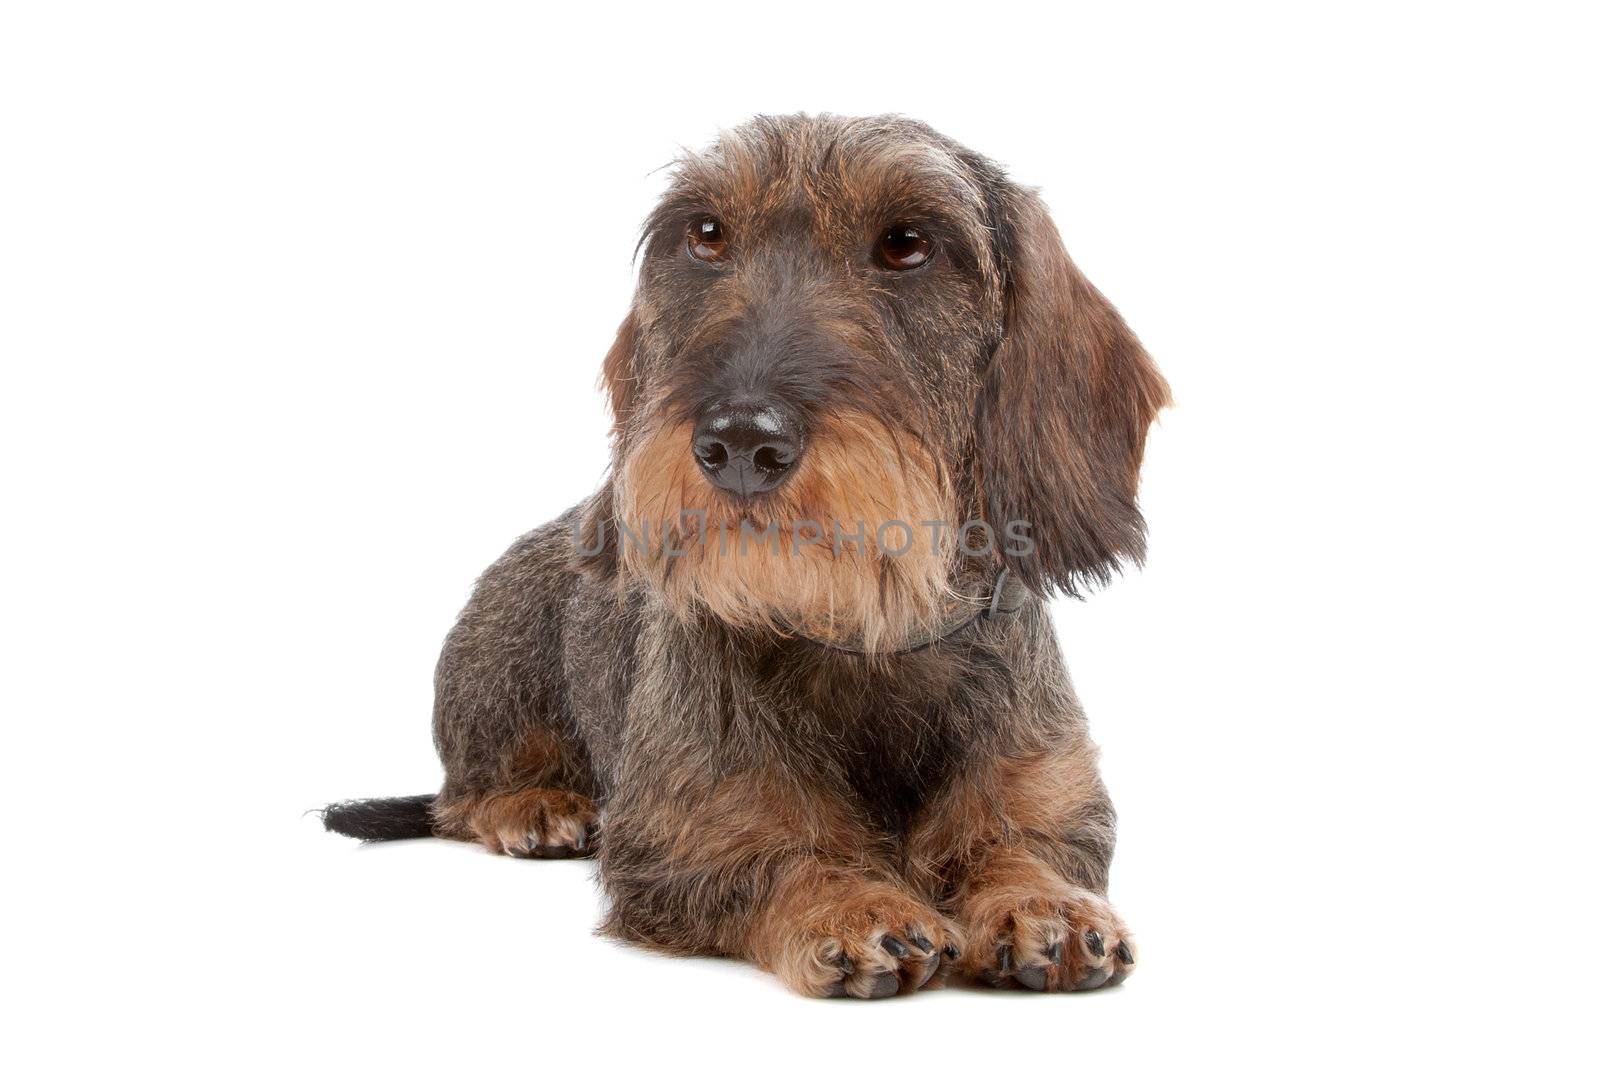 Wire haired Dachshund dog lying on front, isolated on a white background